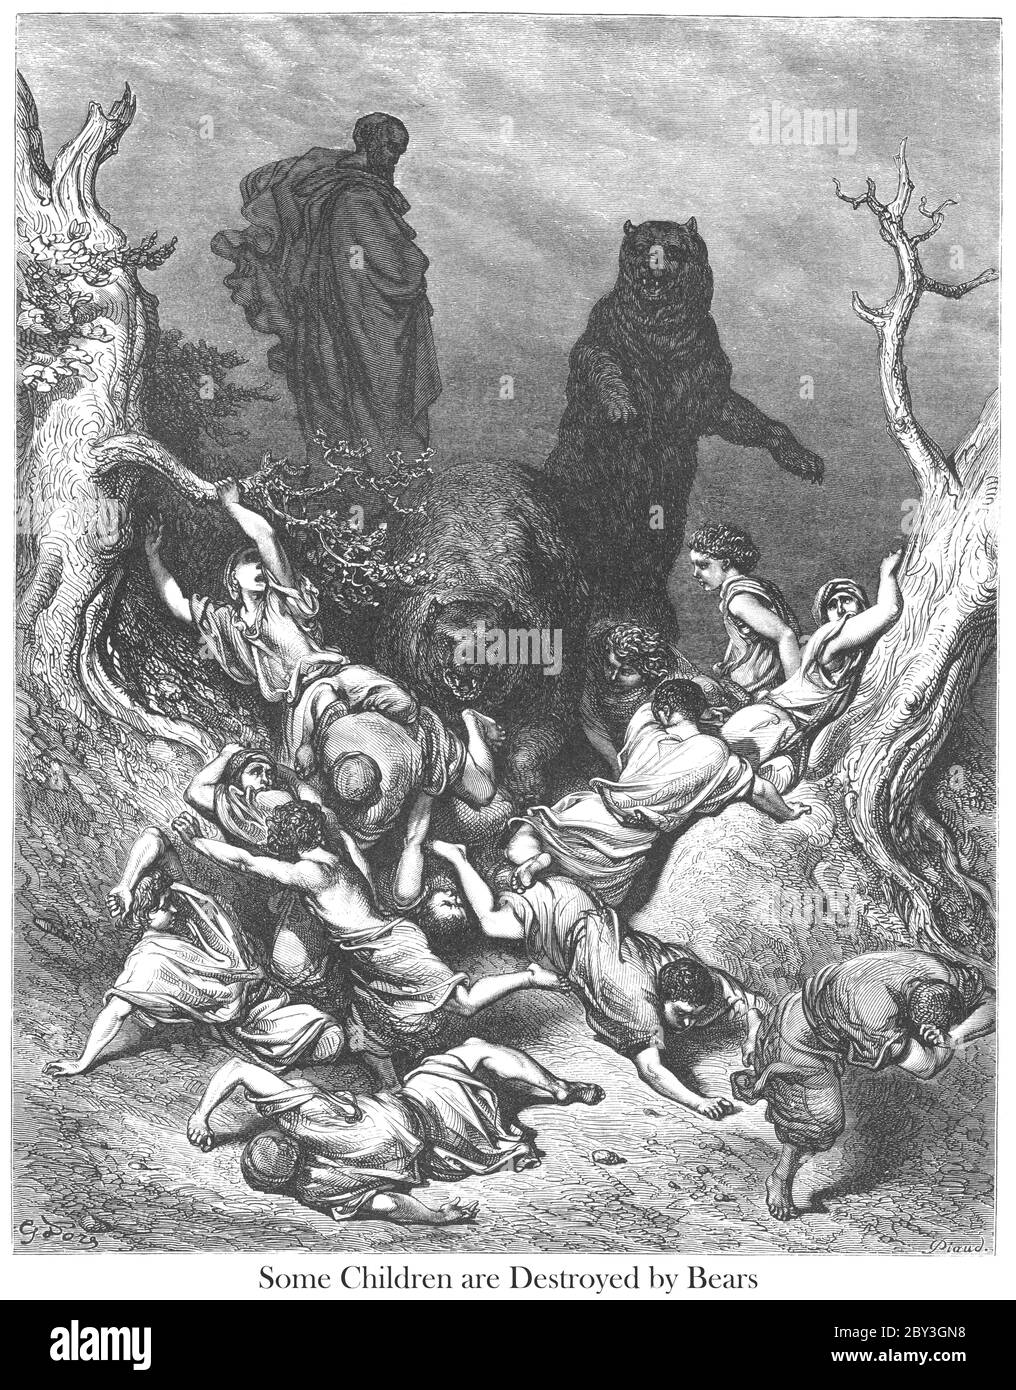 The Children Destroyed by Bears [The bears savaging the youths at Elisha's command] 2 Kings 2:23-24 From the book 'Bible Gallery' Illustrated by Gustave Dore with Memoir of Dore and Descriptive Letter-press by Talbot W. Chambers D.D. Published by Cassell & Company Limited in London and simultaneously by Mame in Tours, France in 1866 Stock Photo